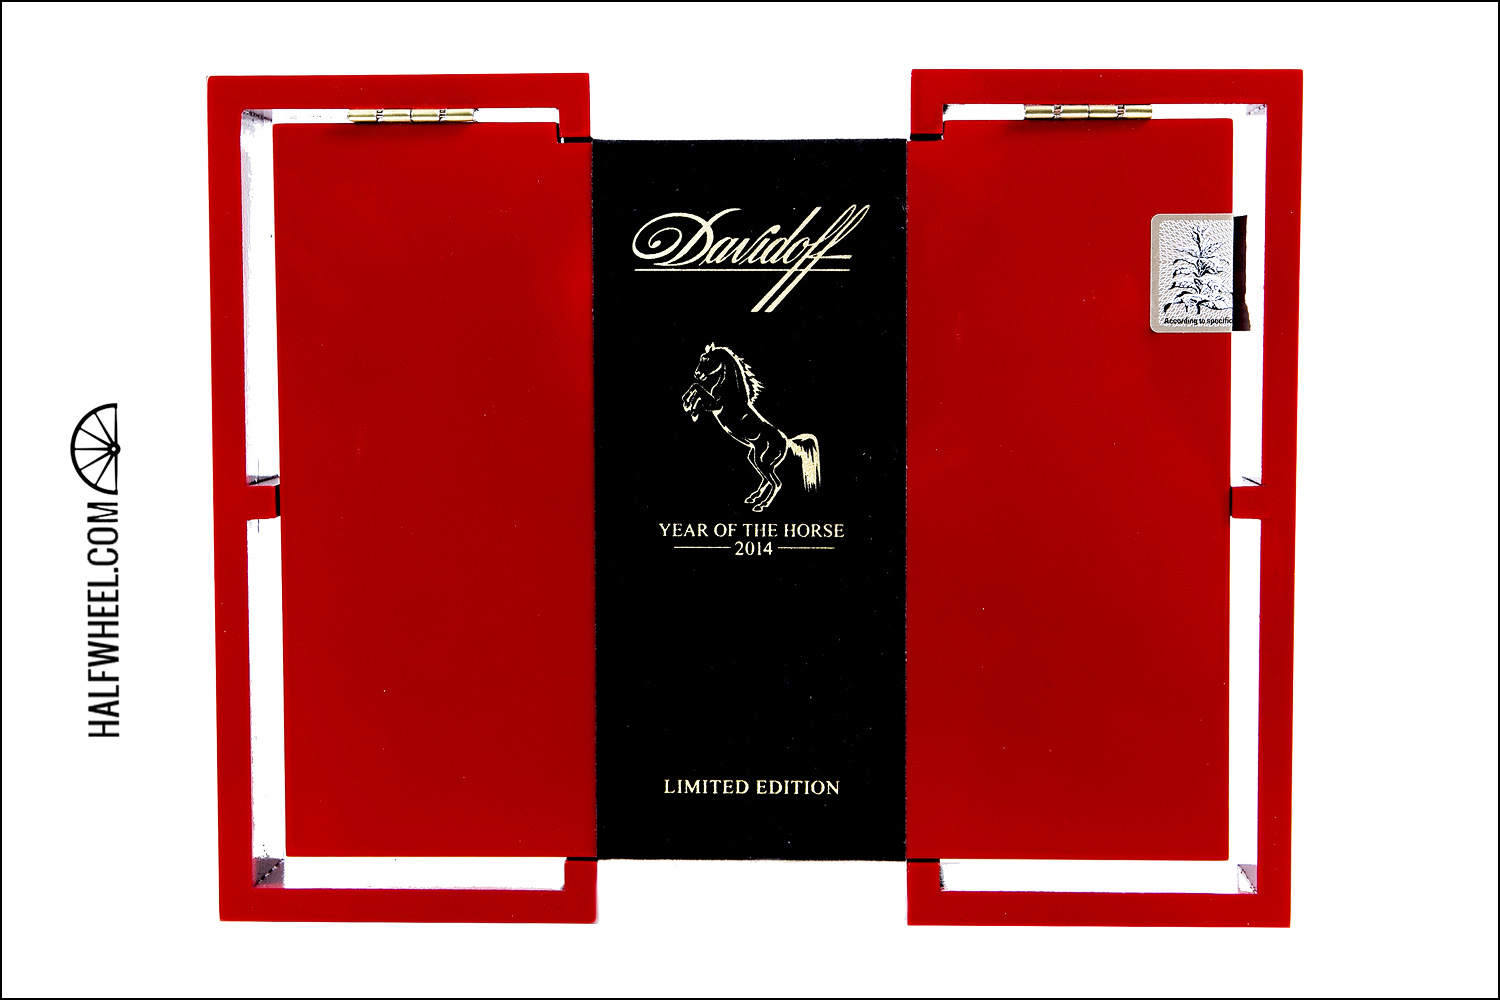 Davidoff Limited Edition 2014 Year of the Horse Box 1